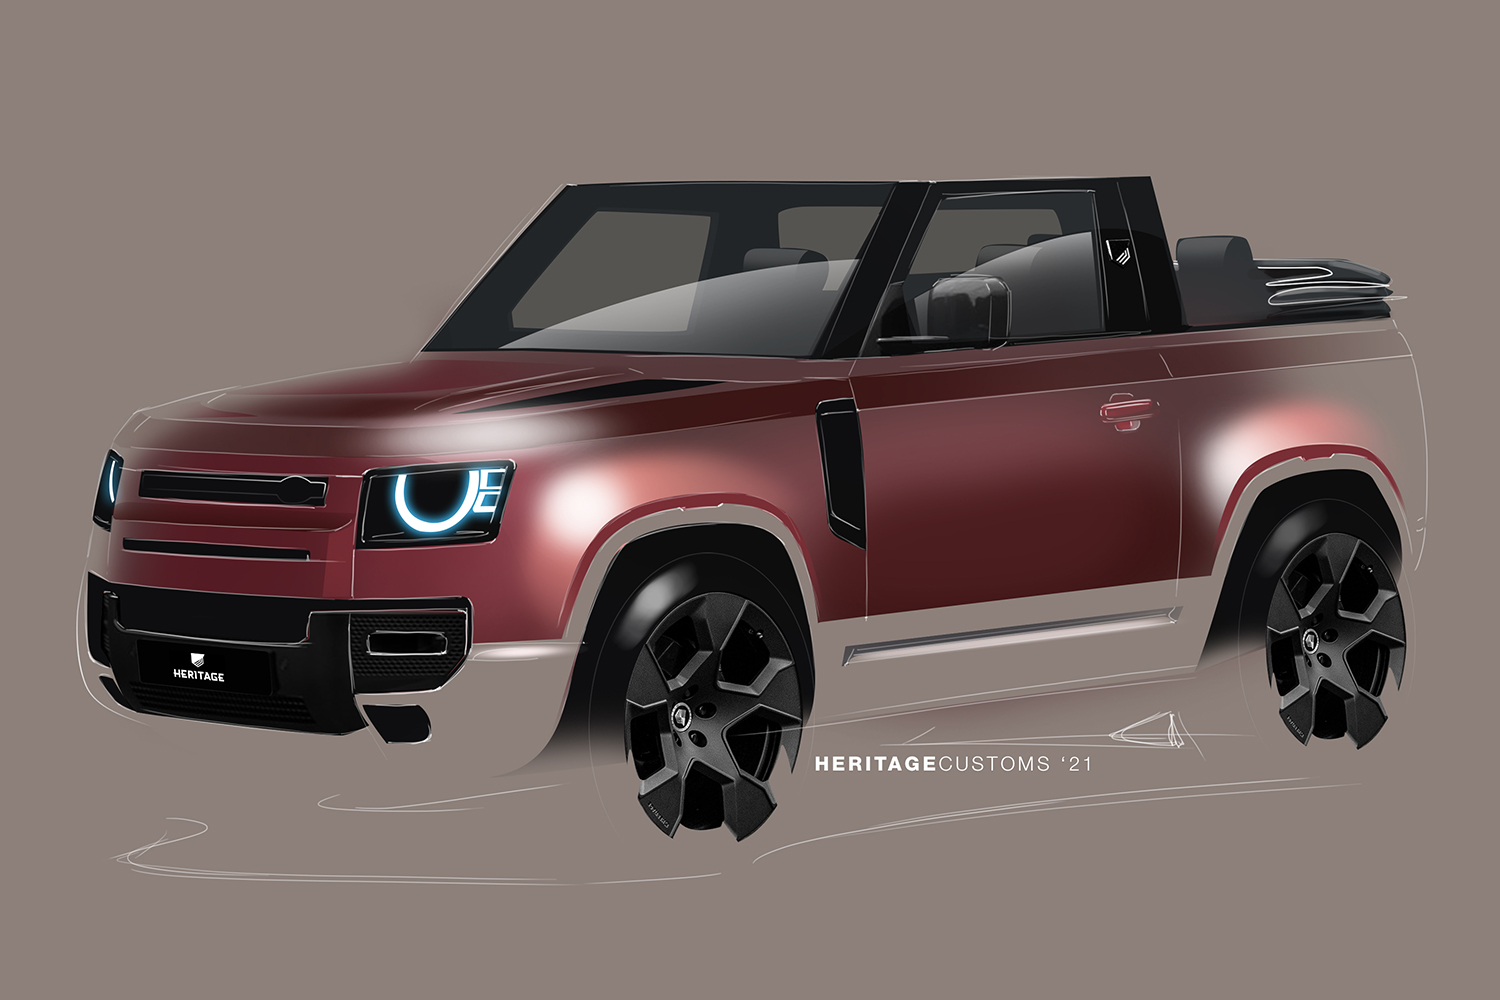 A drawing of the new Valiance Convertible from Heritage Customs, a new Land Rover Defender 90 with a soft top that's available in 2022